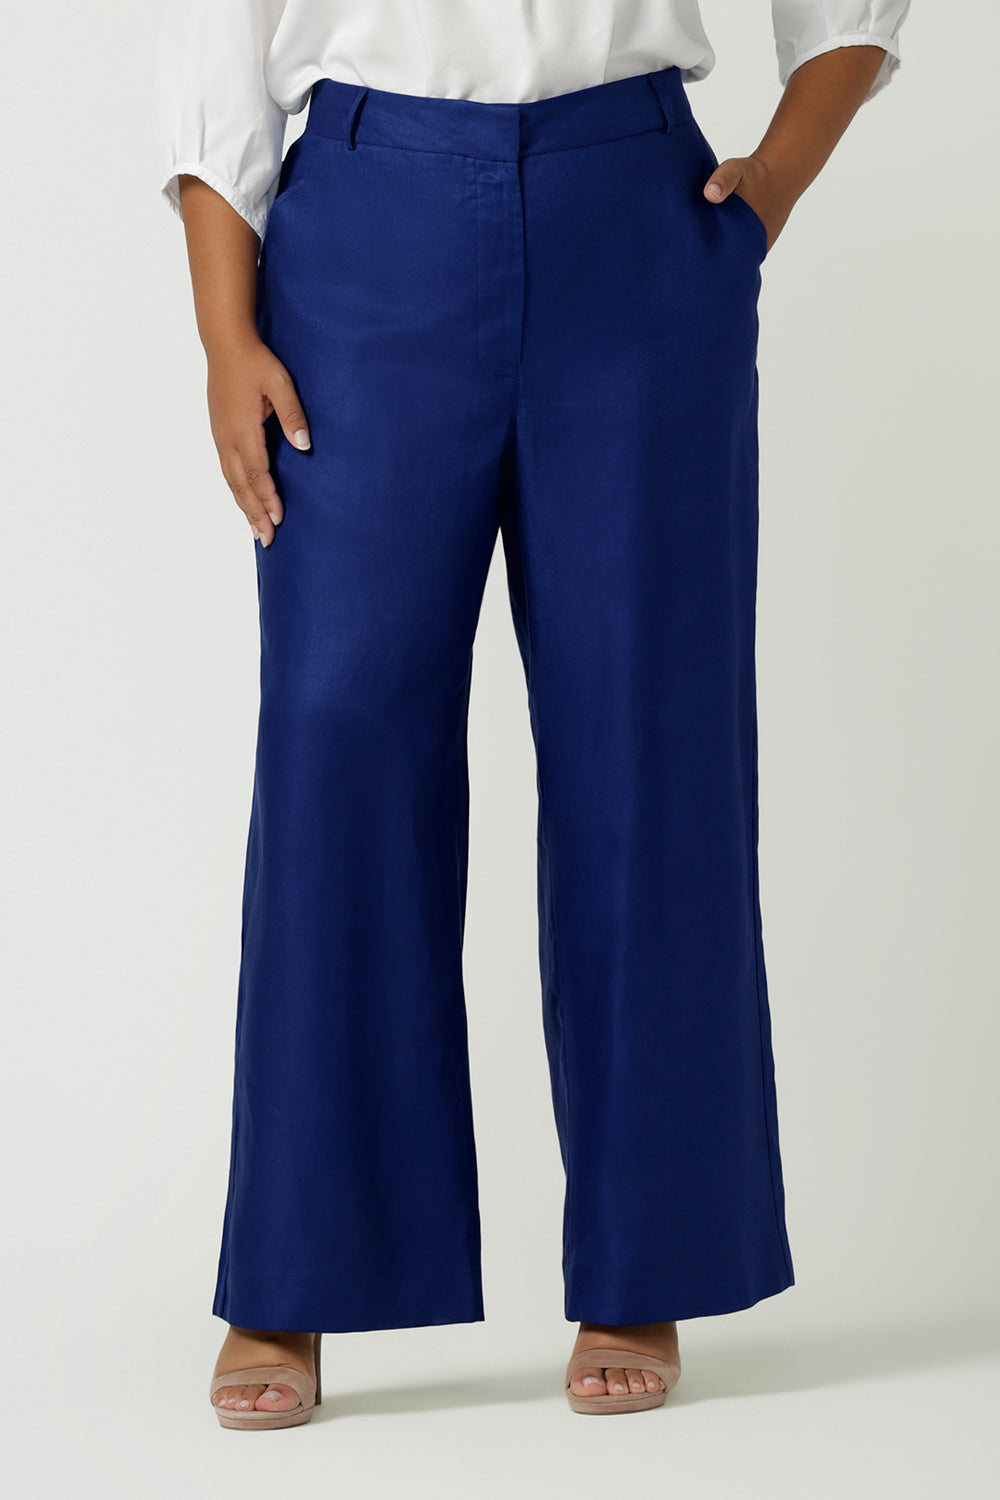 High waist Ronnie pant in high waist linen. Styled back with a white Arley shirt and heeled shoes. Made in Australia for women size 8 - 24.